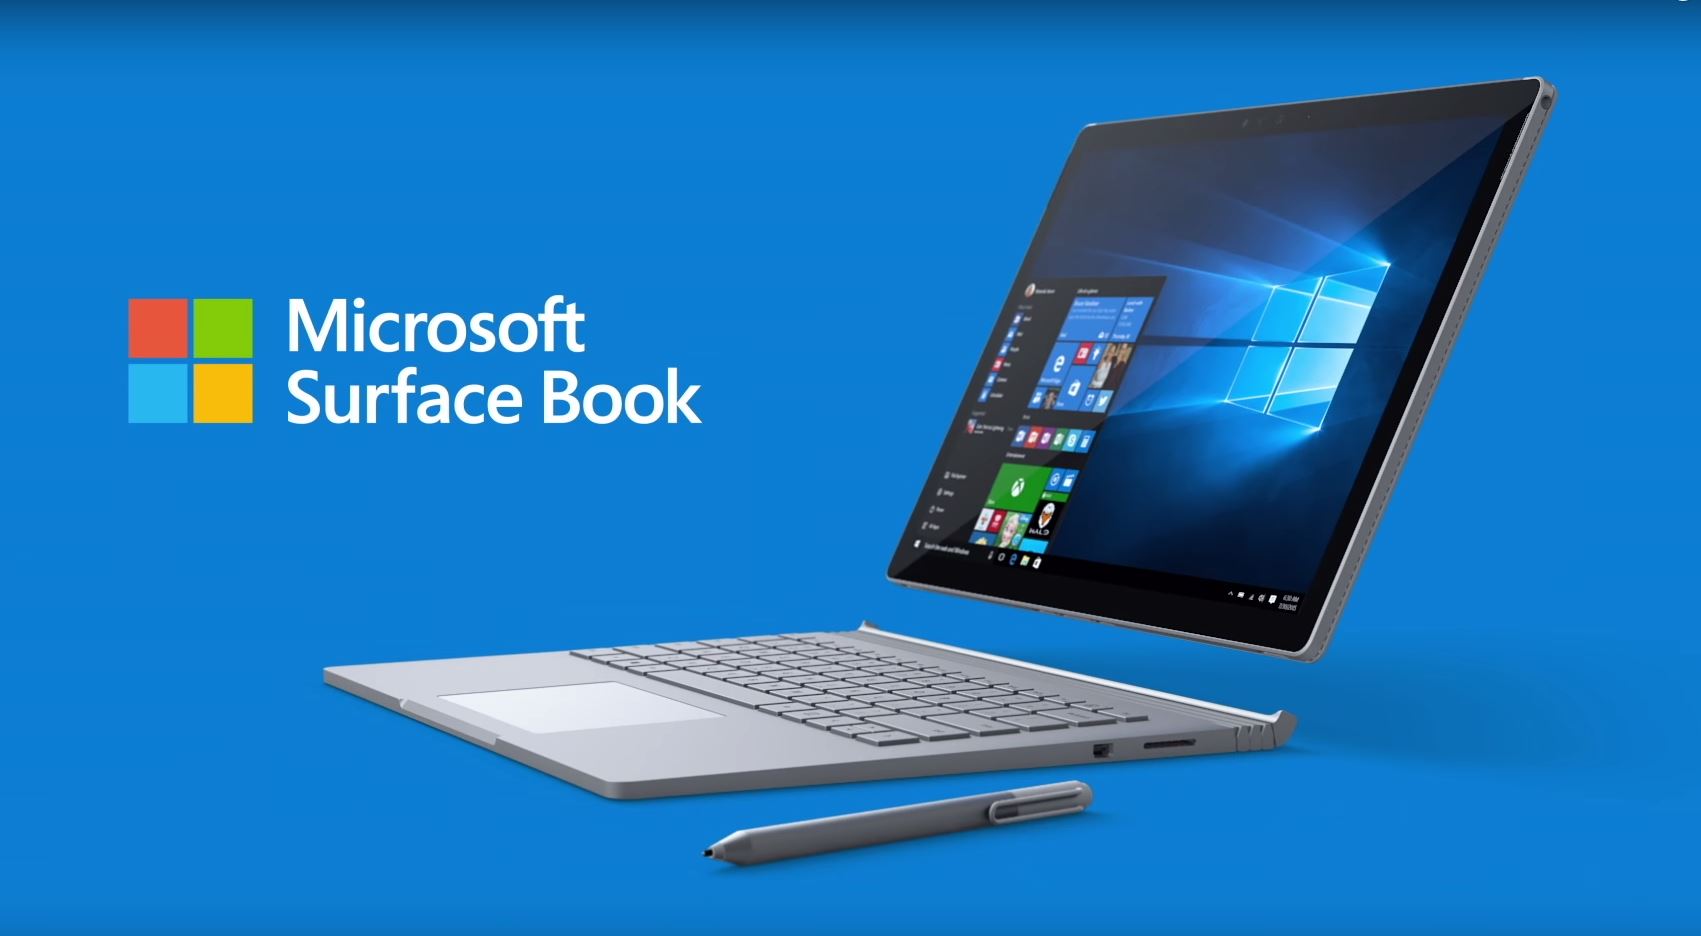 Microsoft Launches Surface Book and Surface Pro 4 | Custom PC Review